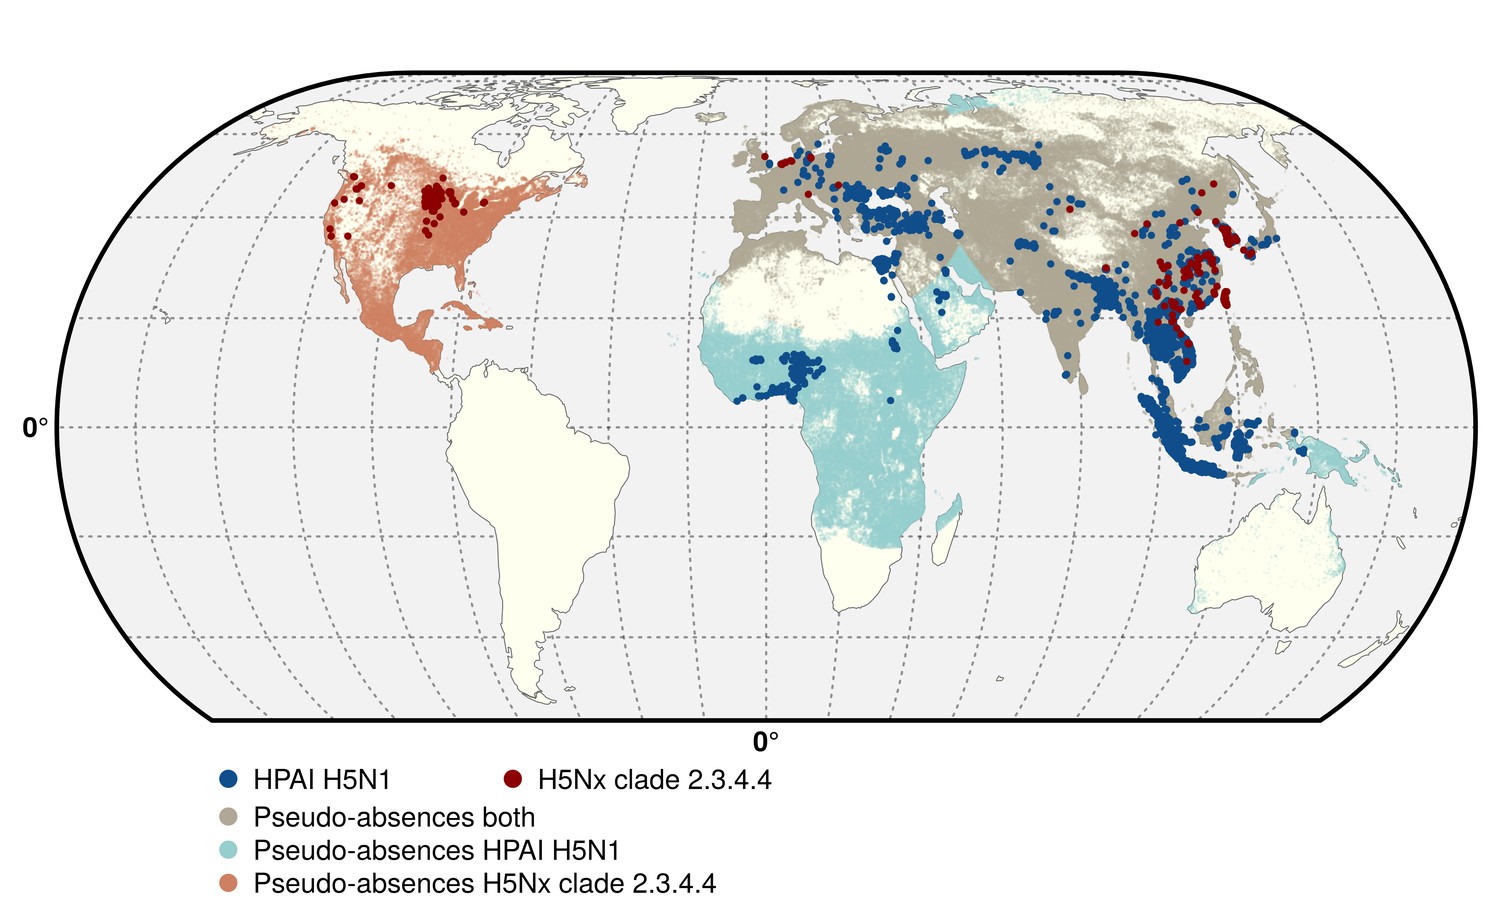 Global mapping of highly pathogenic avian influenza H5N1 and H5Nx clade